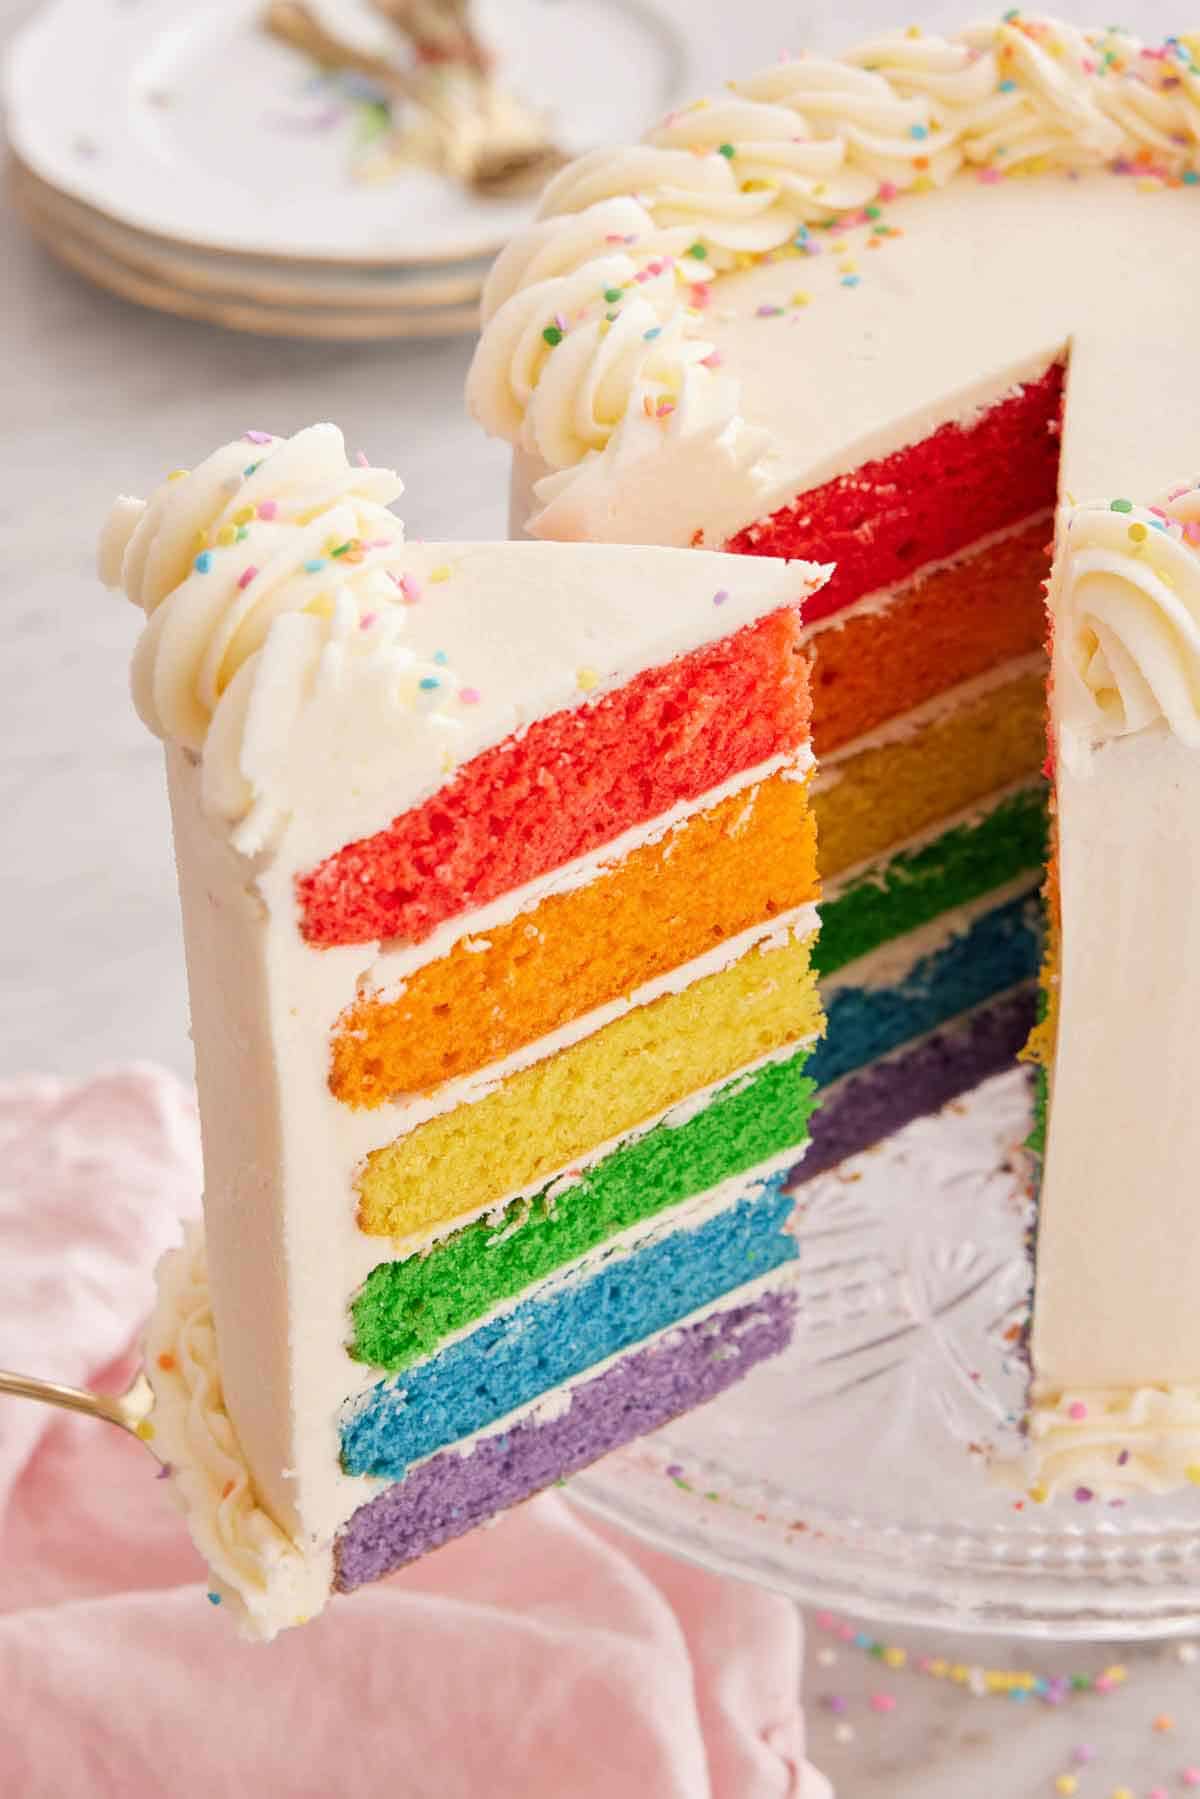 A slice of rainbow cake pulled with a cake spatula from the cake on the cake stand.